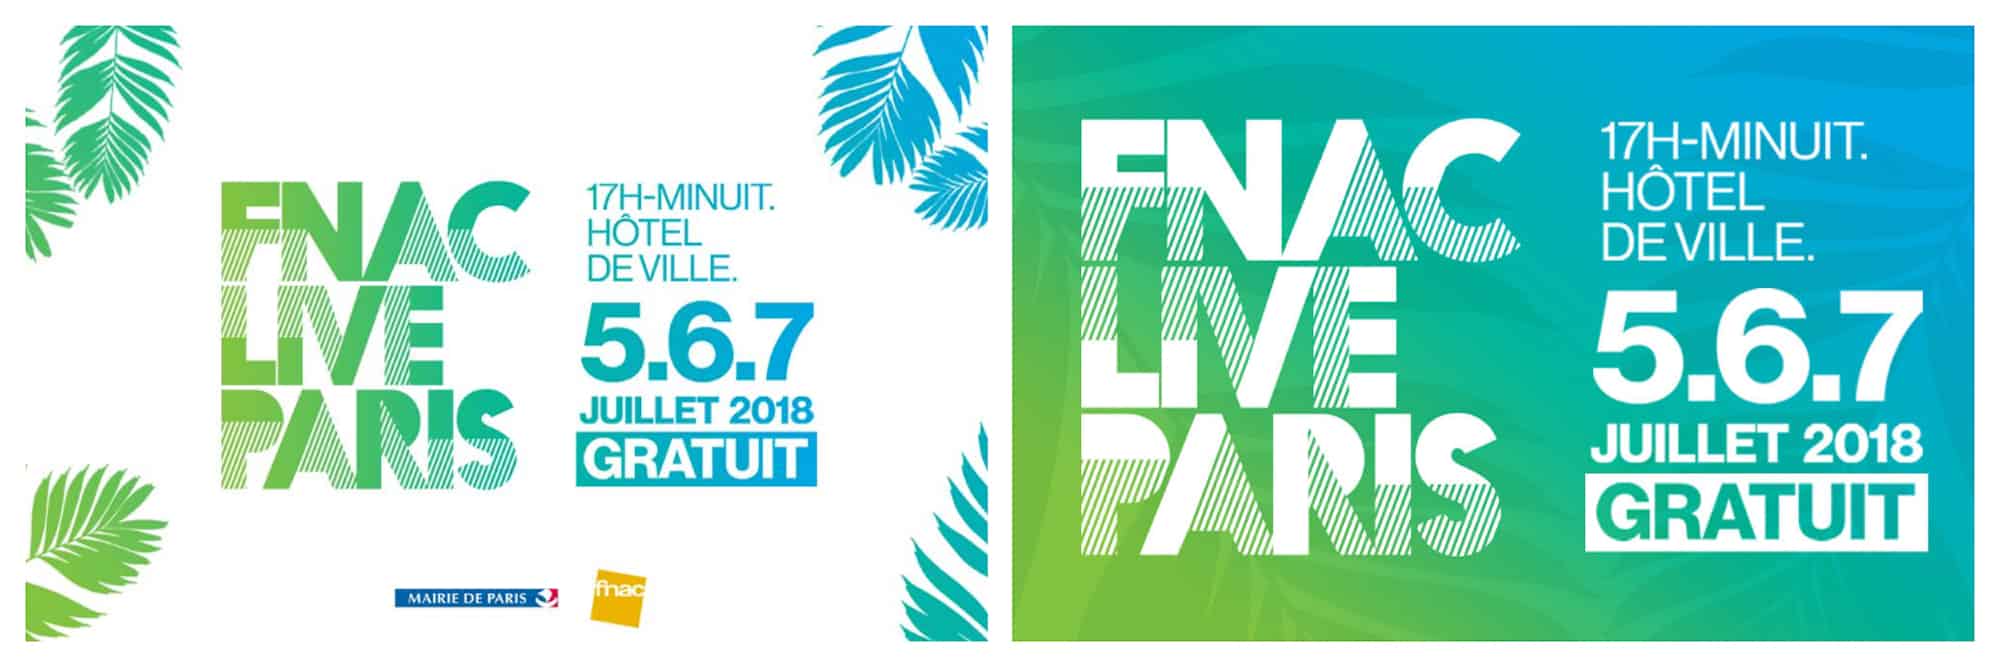 HiP Paris Blog rounds up what's on in Paris this July including various music events and concerts like on this poster for FNAC Live Paris.